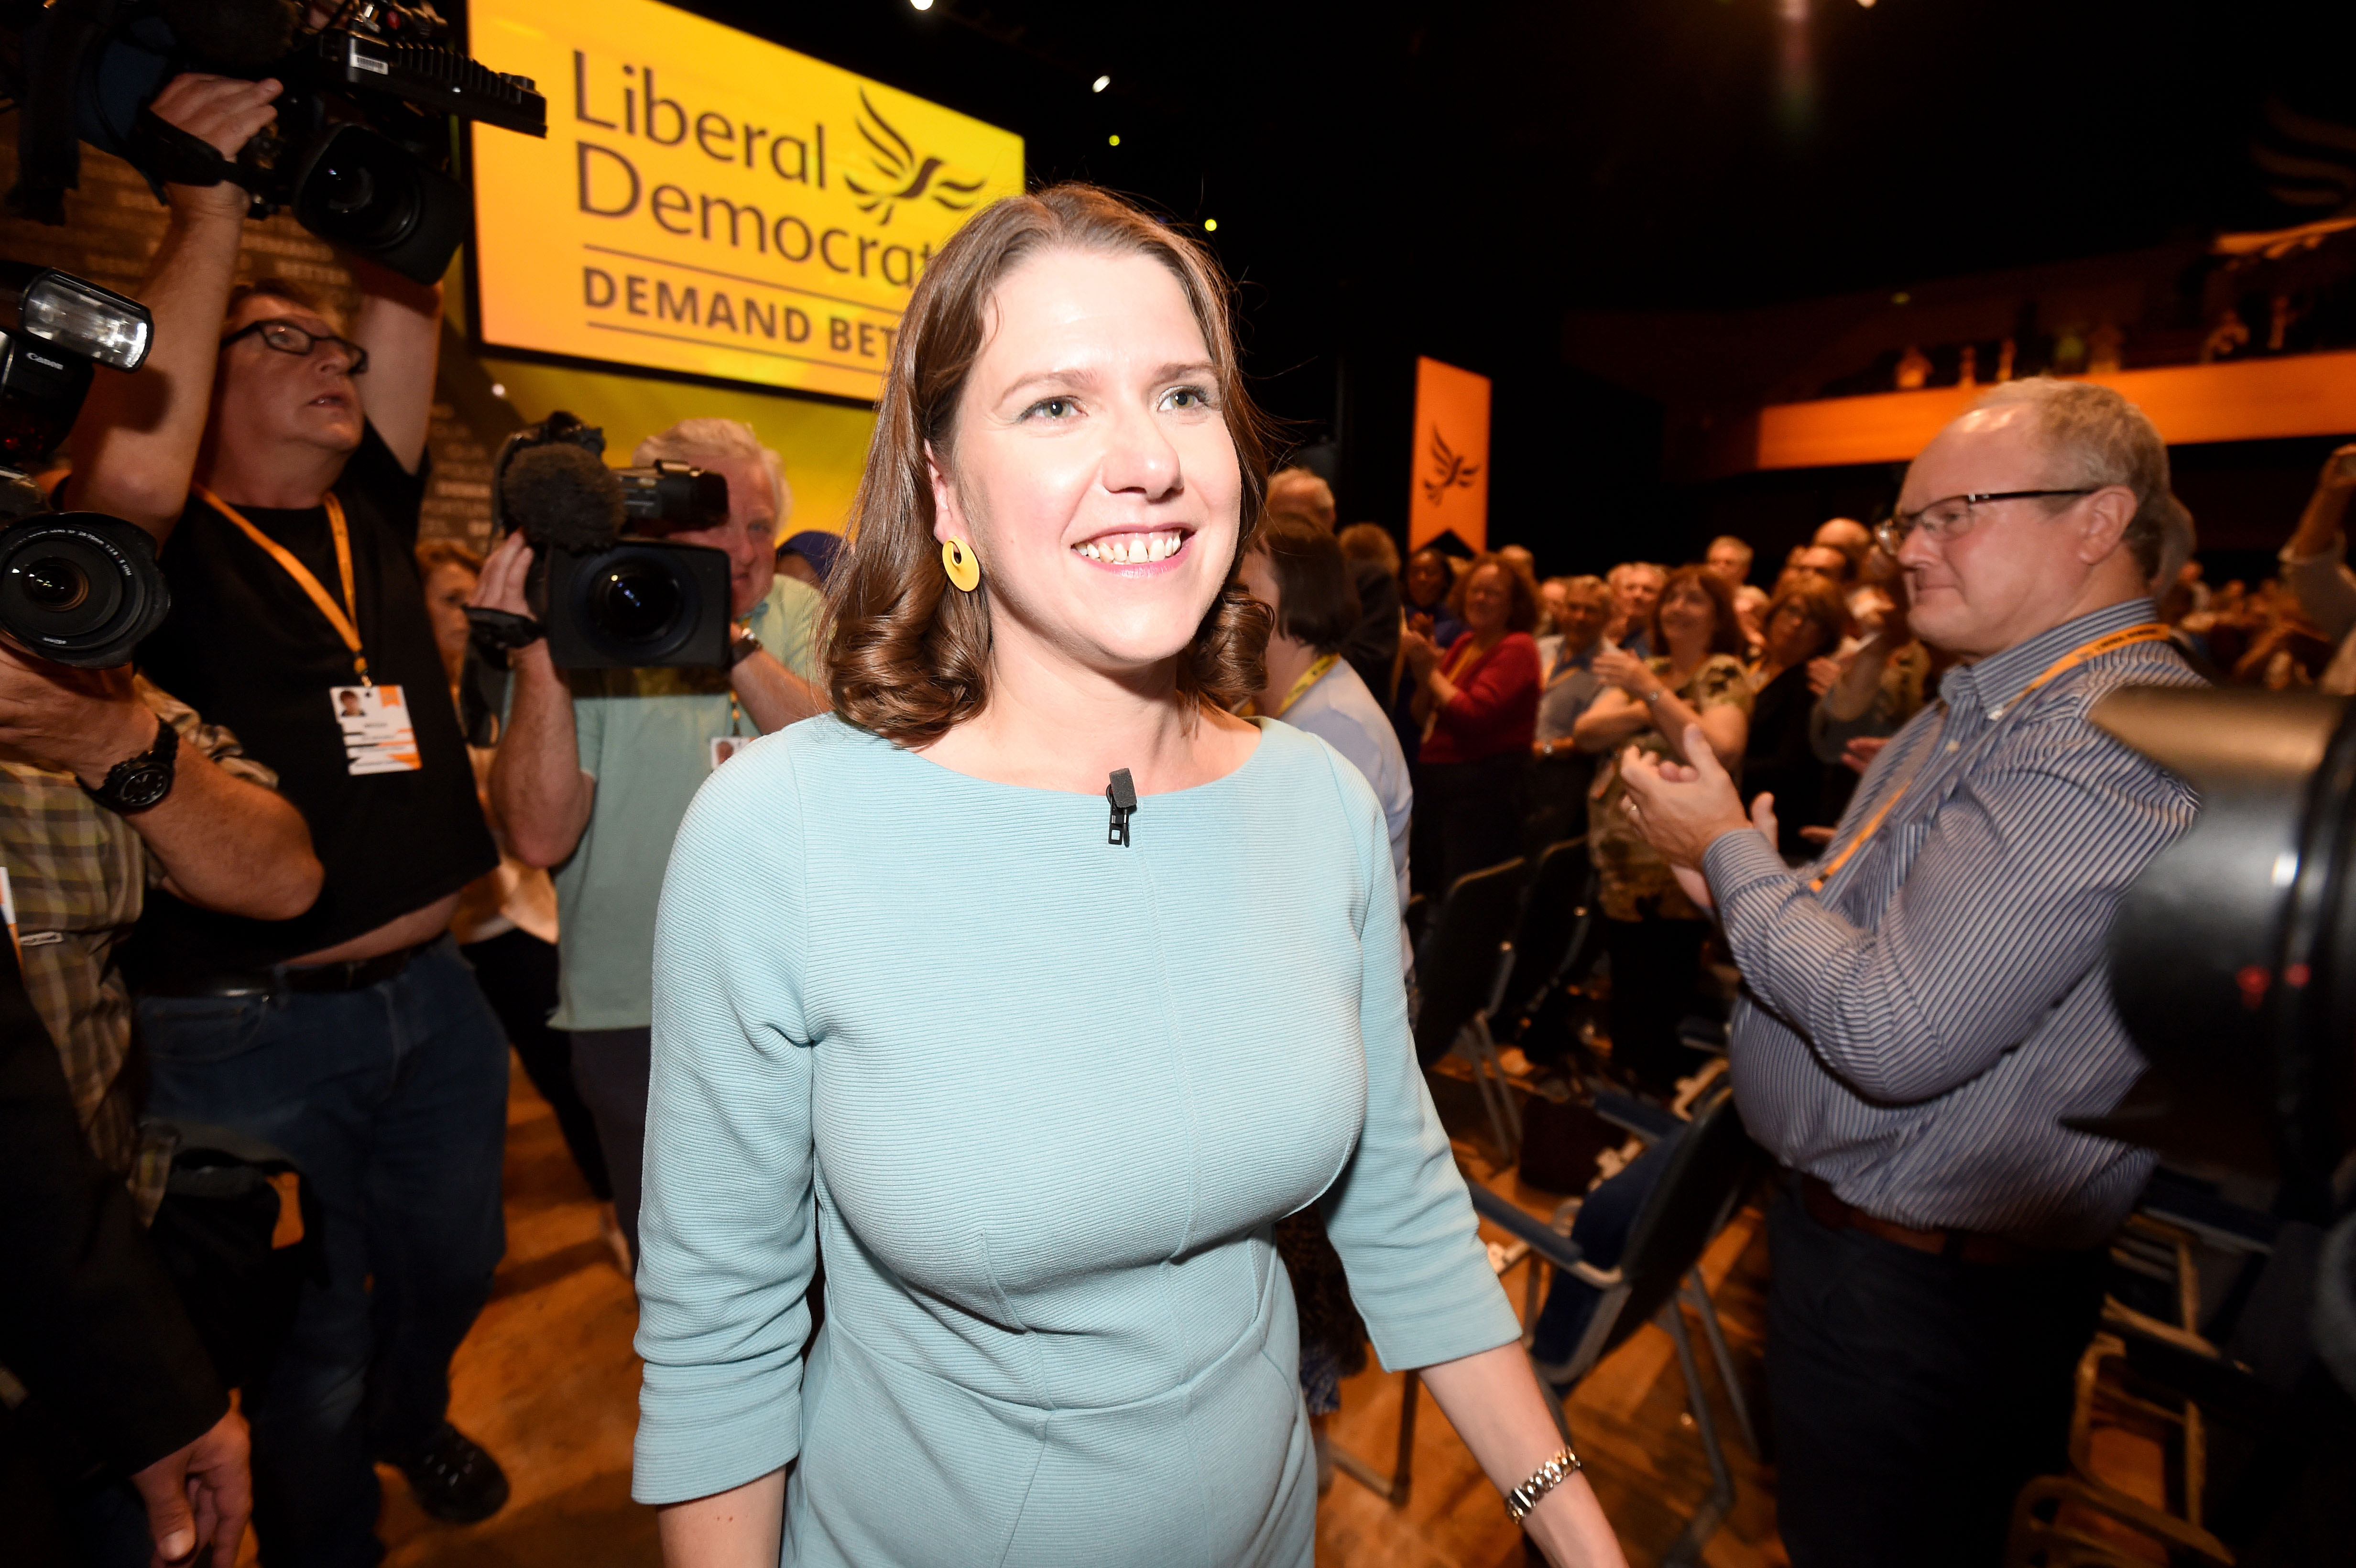 Liberal Democrat leader, Jo Swinson delivers her first keynote speech at the Liberal Democrat Party Conference at the Bournemouth International Centre on September 17, 2019 in Bournemouth, England.